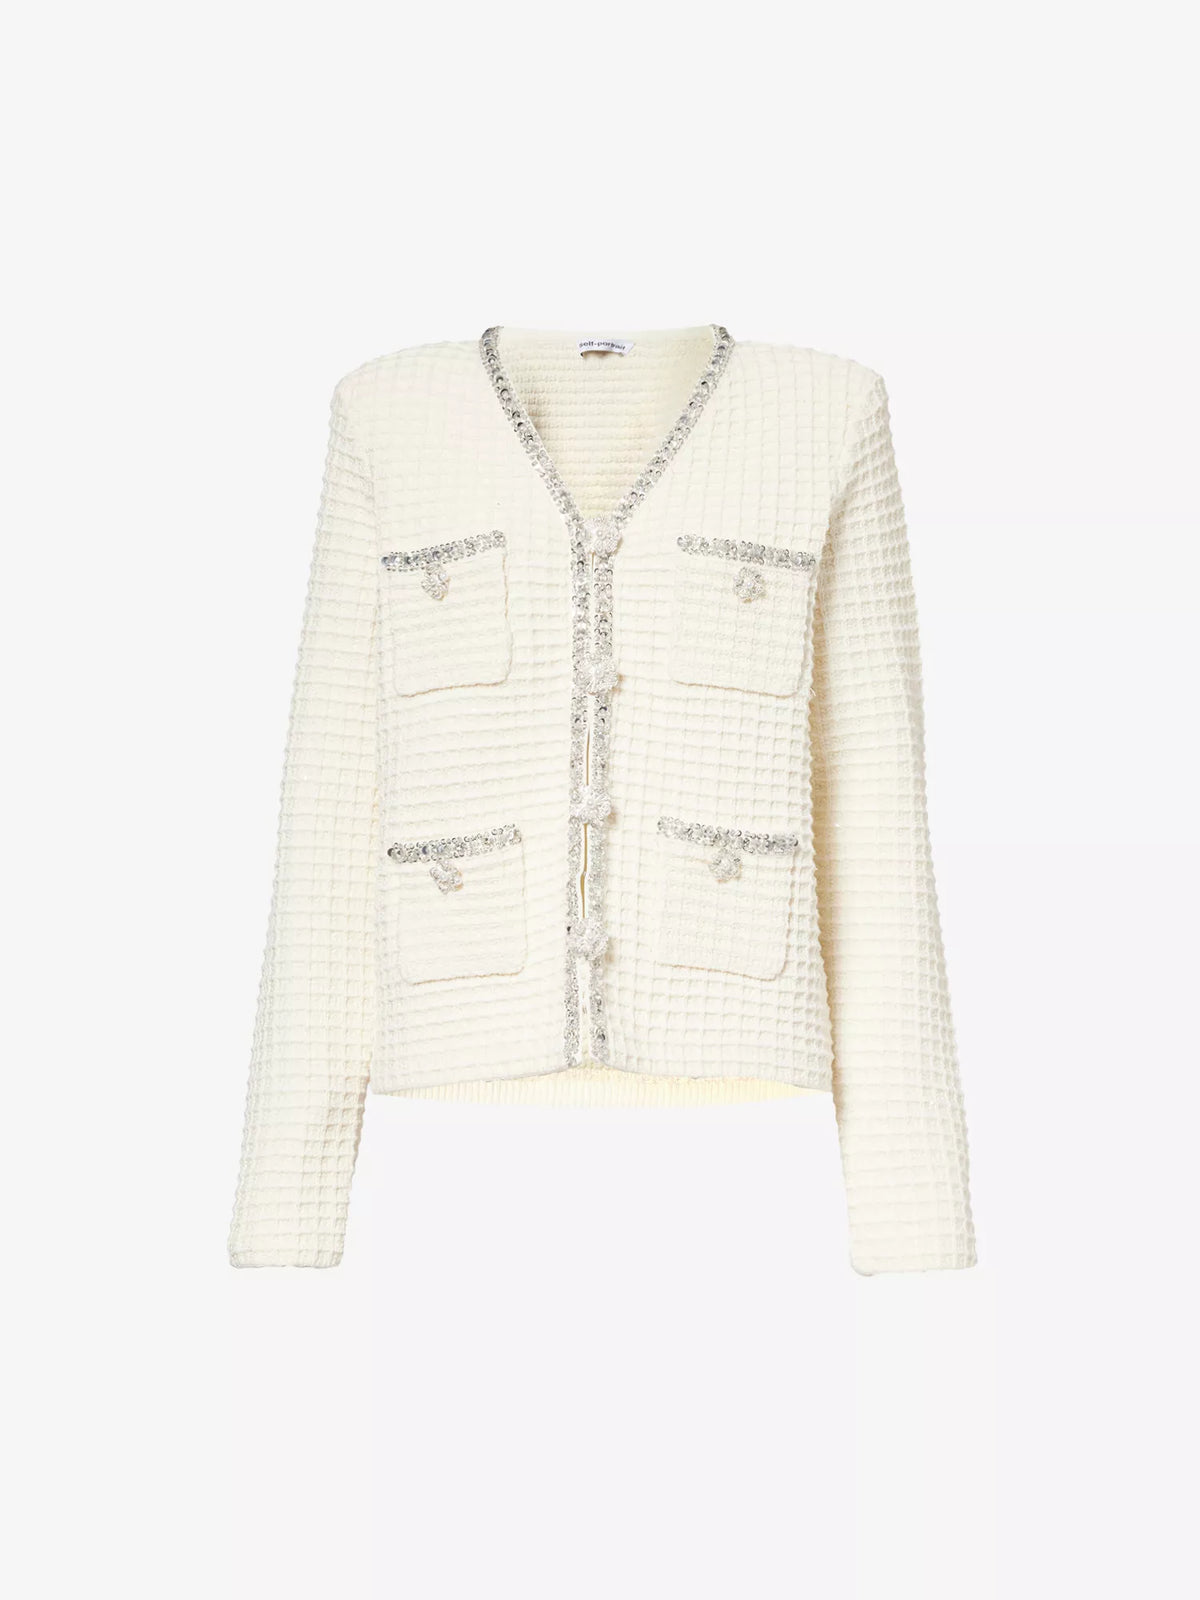 Cream knitted cardigan with four front patch pockets and silver and diamante buttons and trim